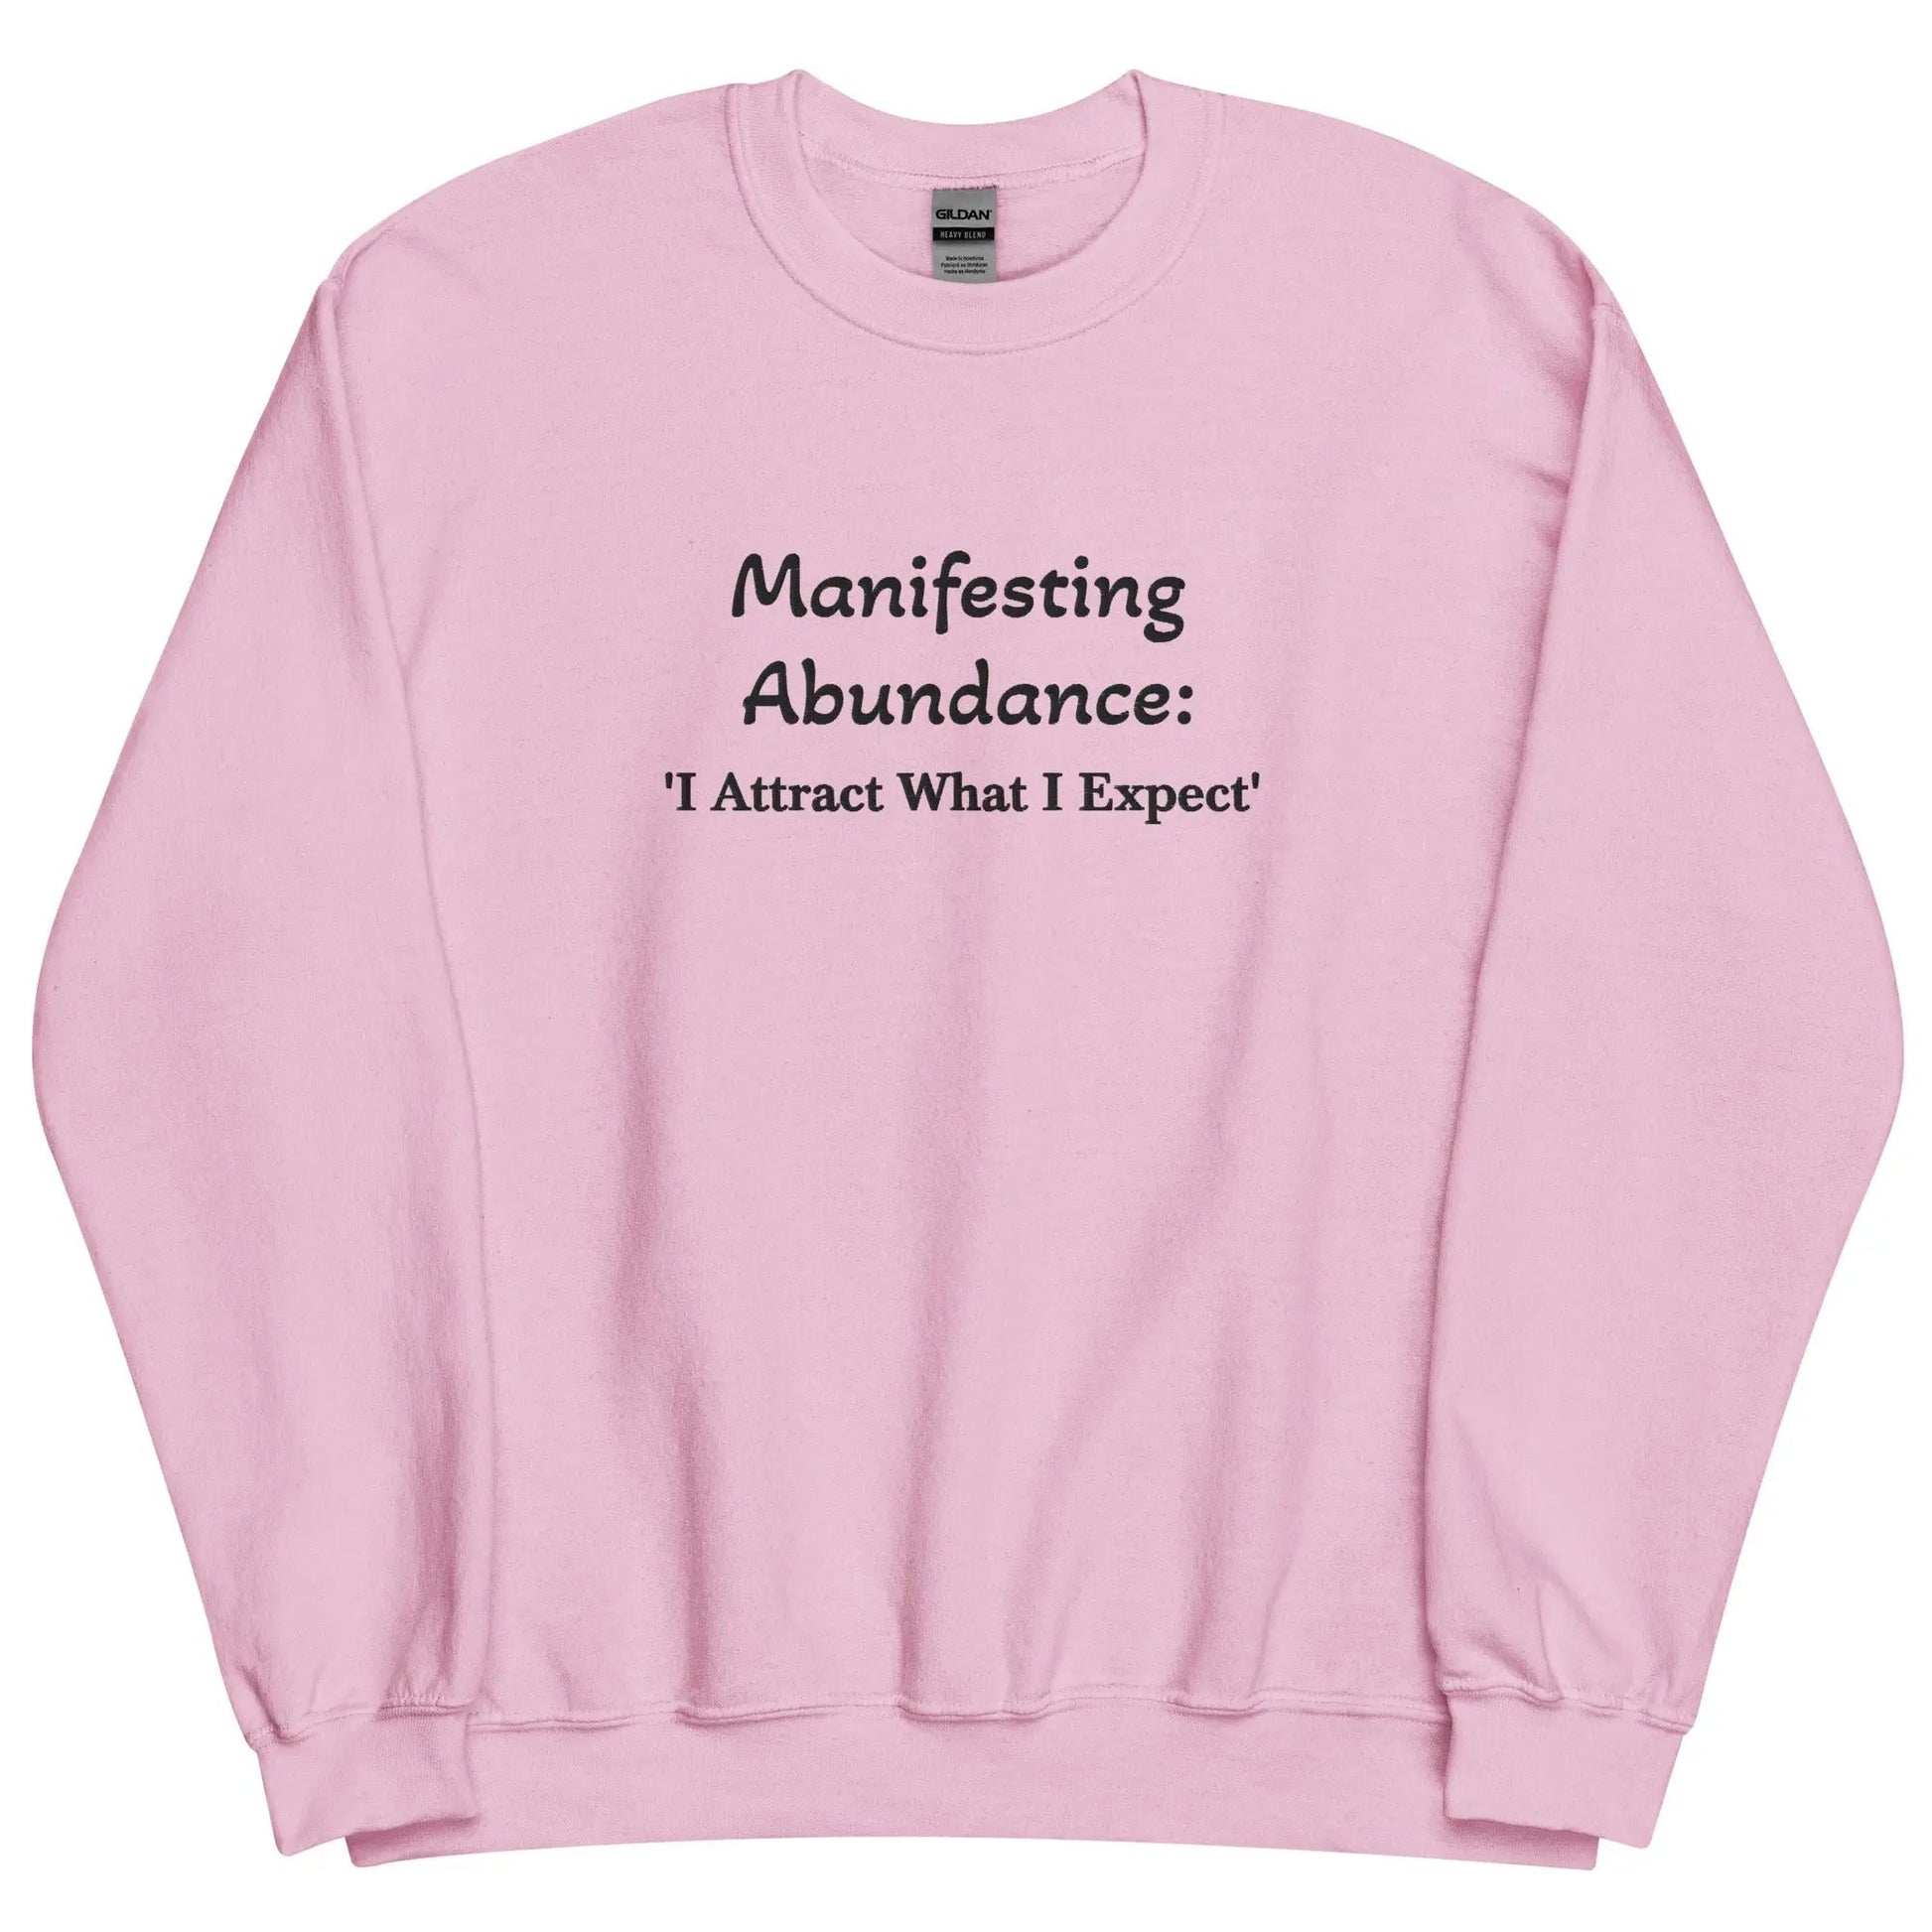 Embroidered Manifesting Abundance: 'I Attract What I Expect' Crewneck Sweatshirt-clothes- sweater-Light Pink-S-mysticalcherry